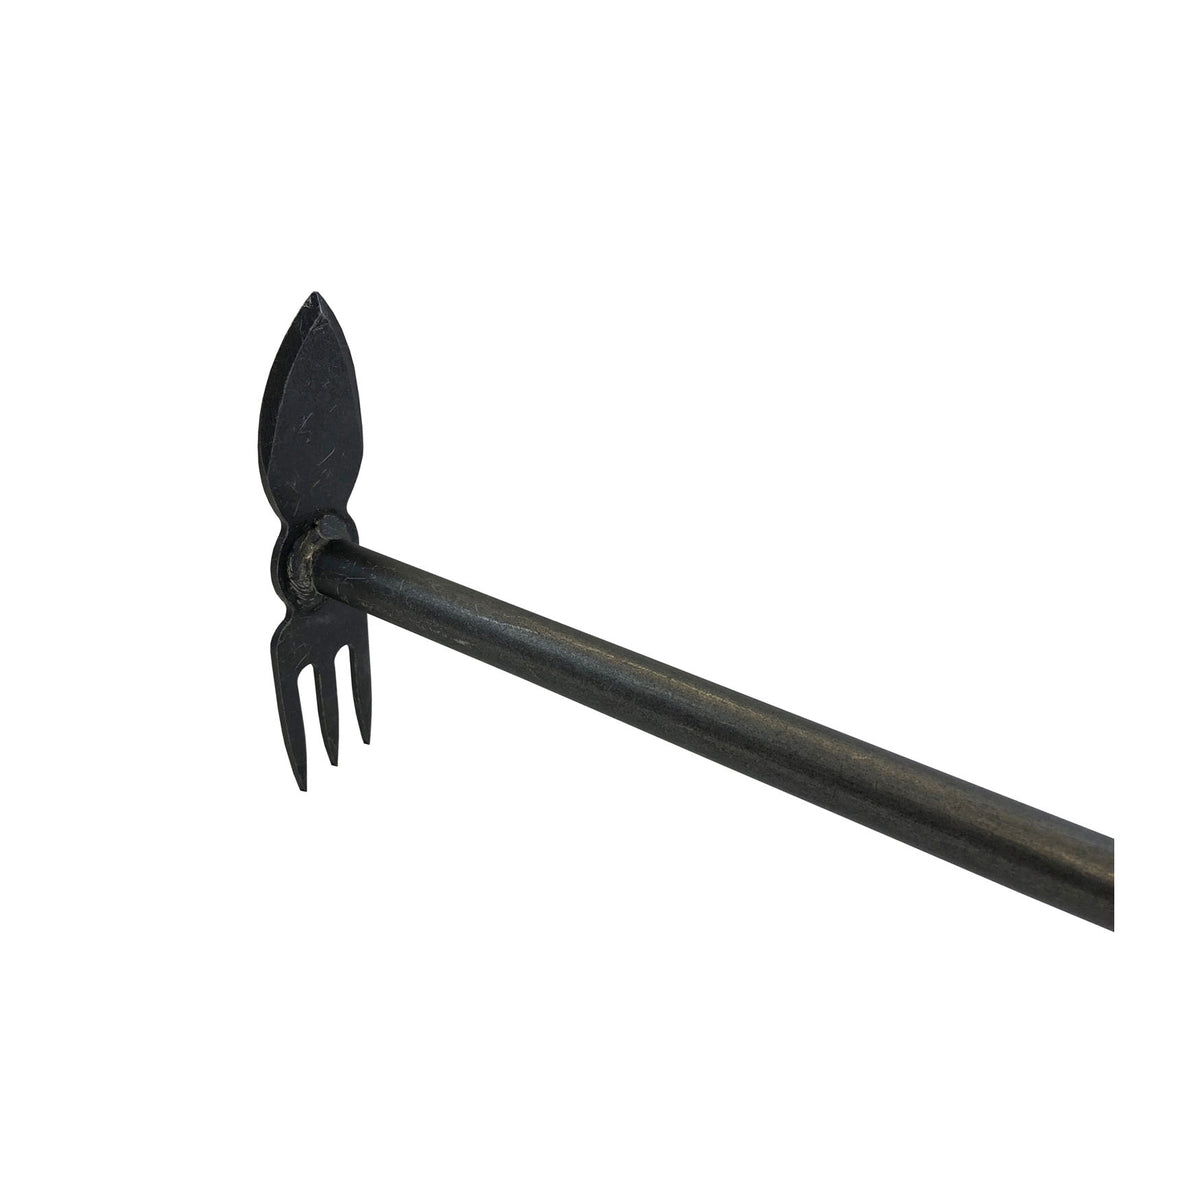 DeWit Comby Hoe - 3 Tine Cultivator / Heart Shaped Long Handle